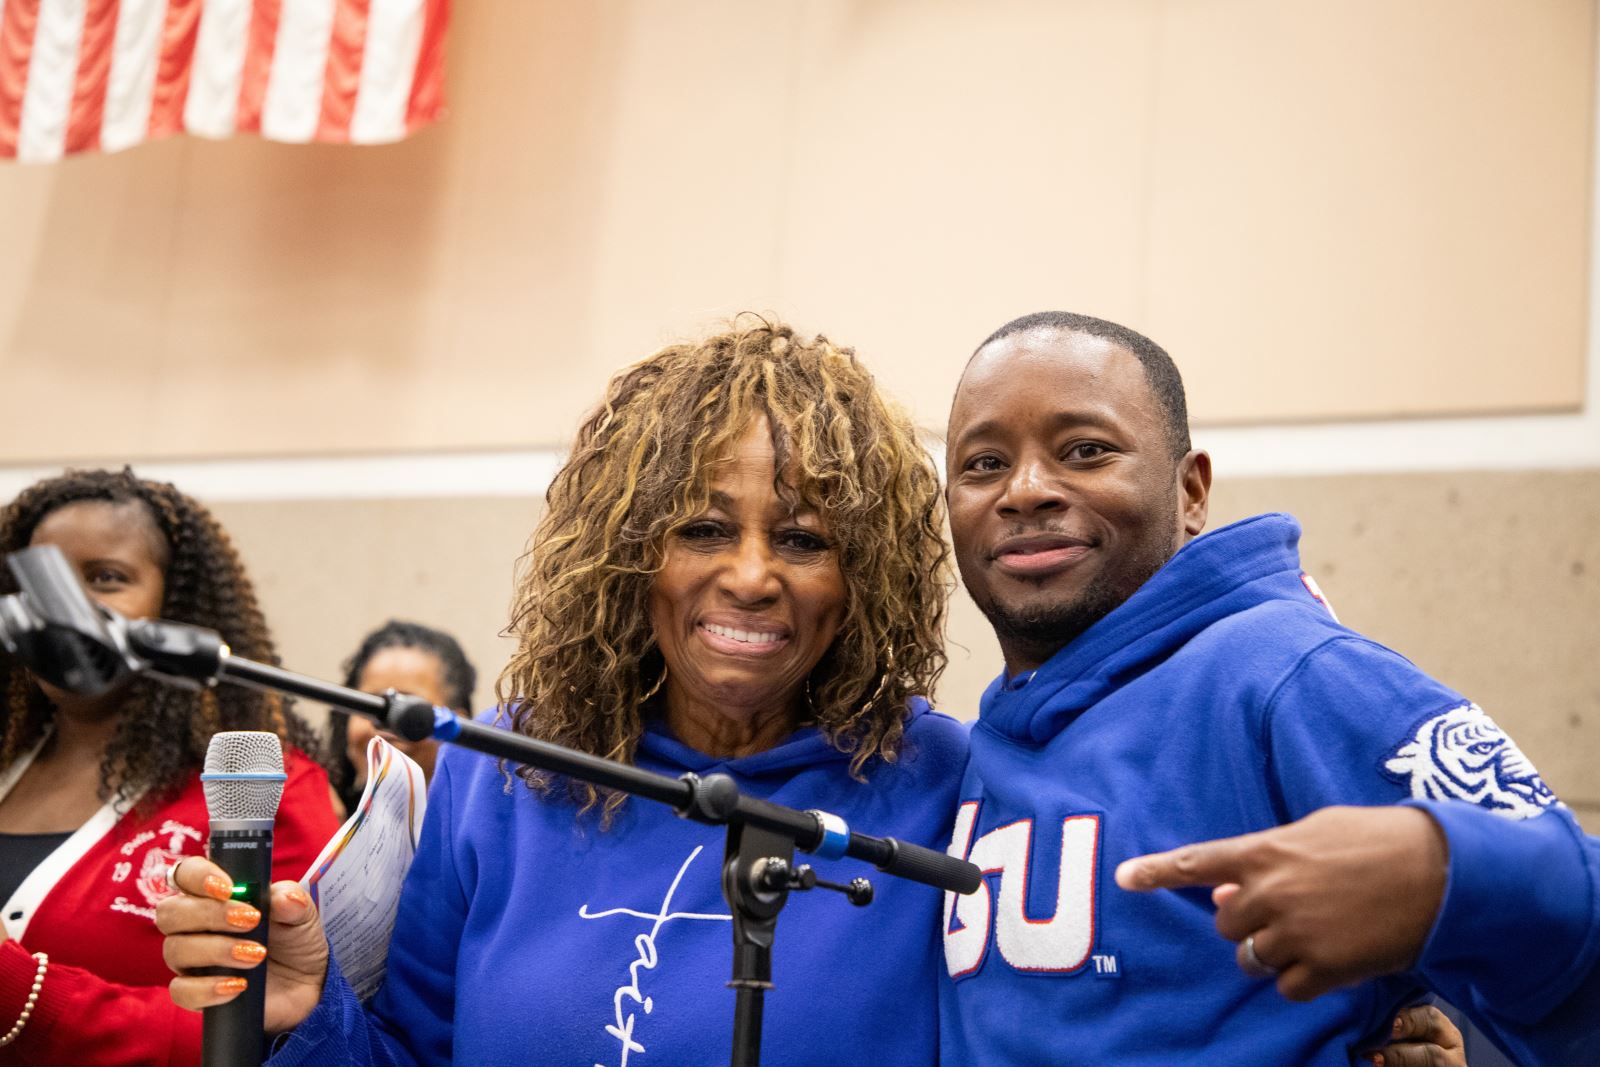 Two speakers, a woman and a man dressed in bright blue hoodies, smile by the microphone.